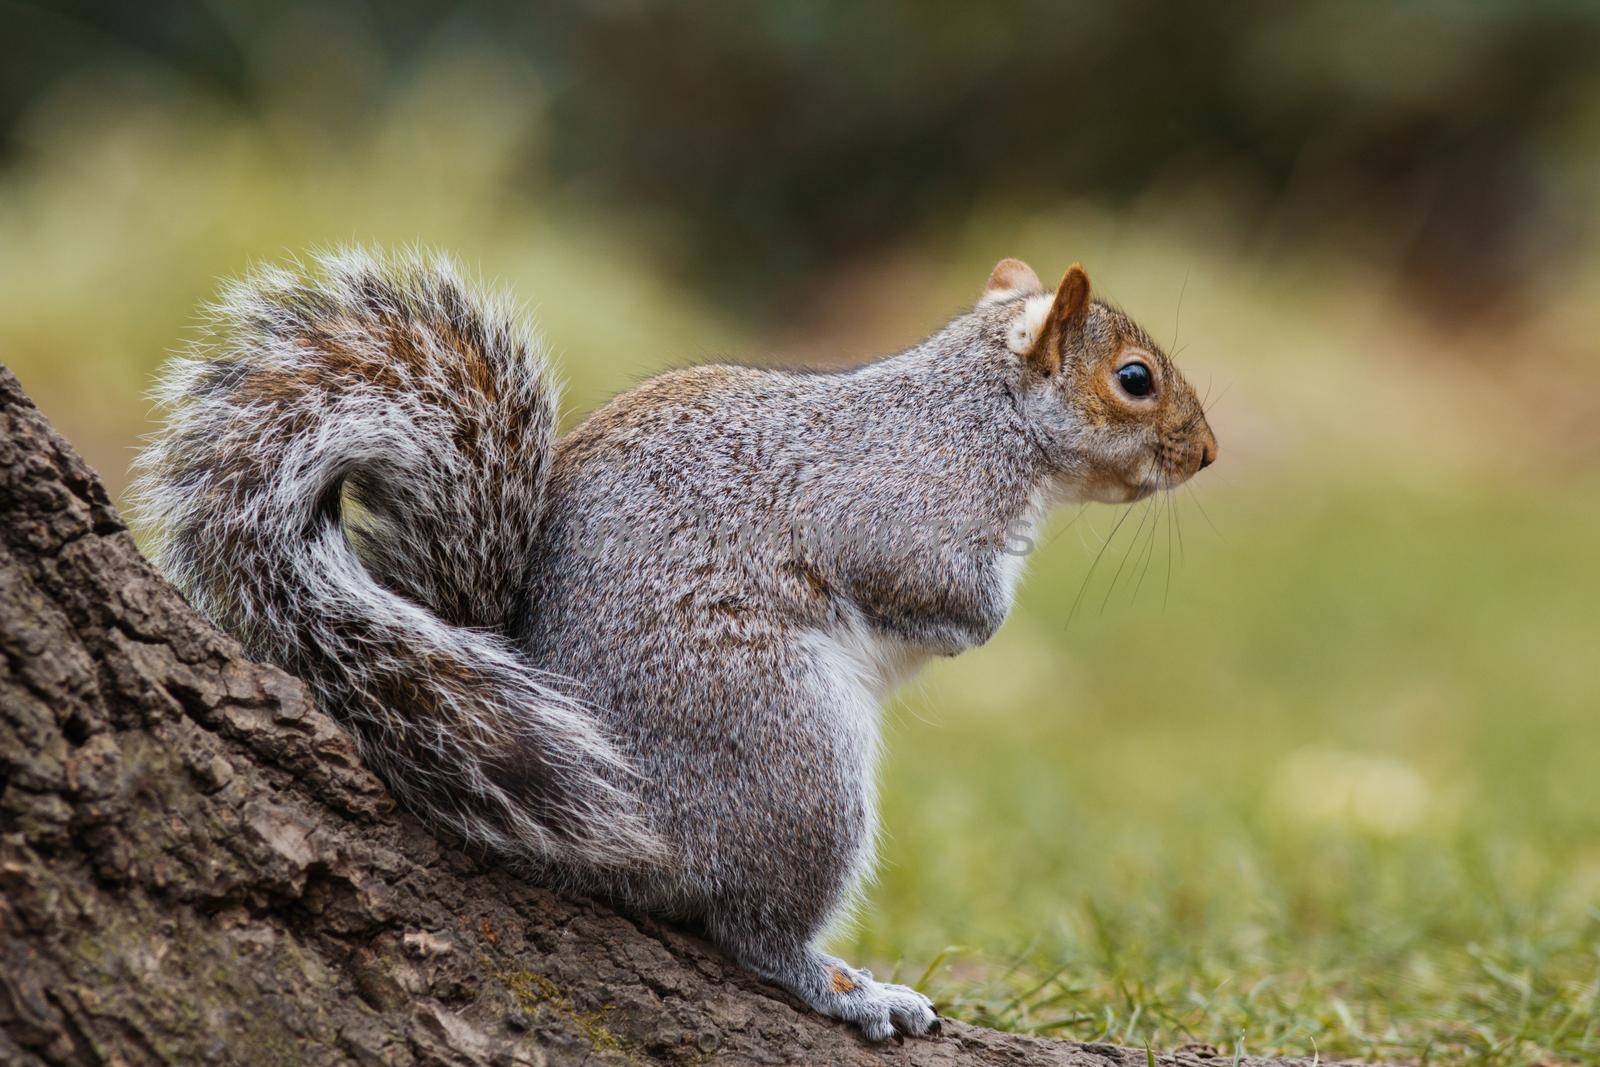 Gray squirrel sitting on a tree branch in the park and smiling, close-up